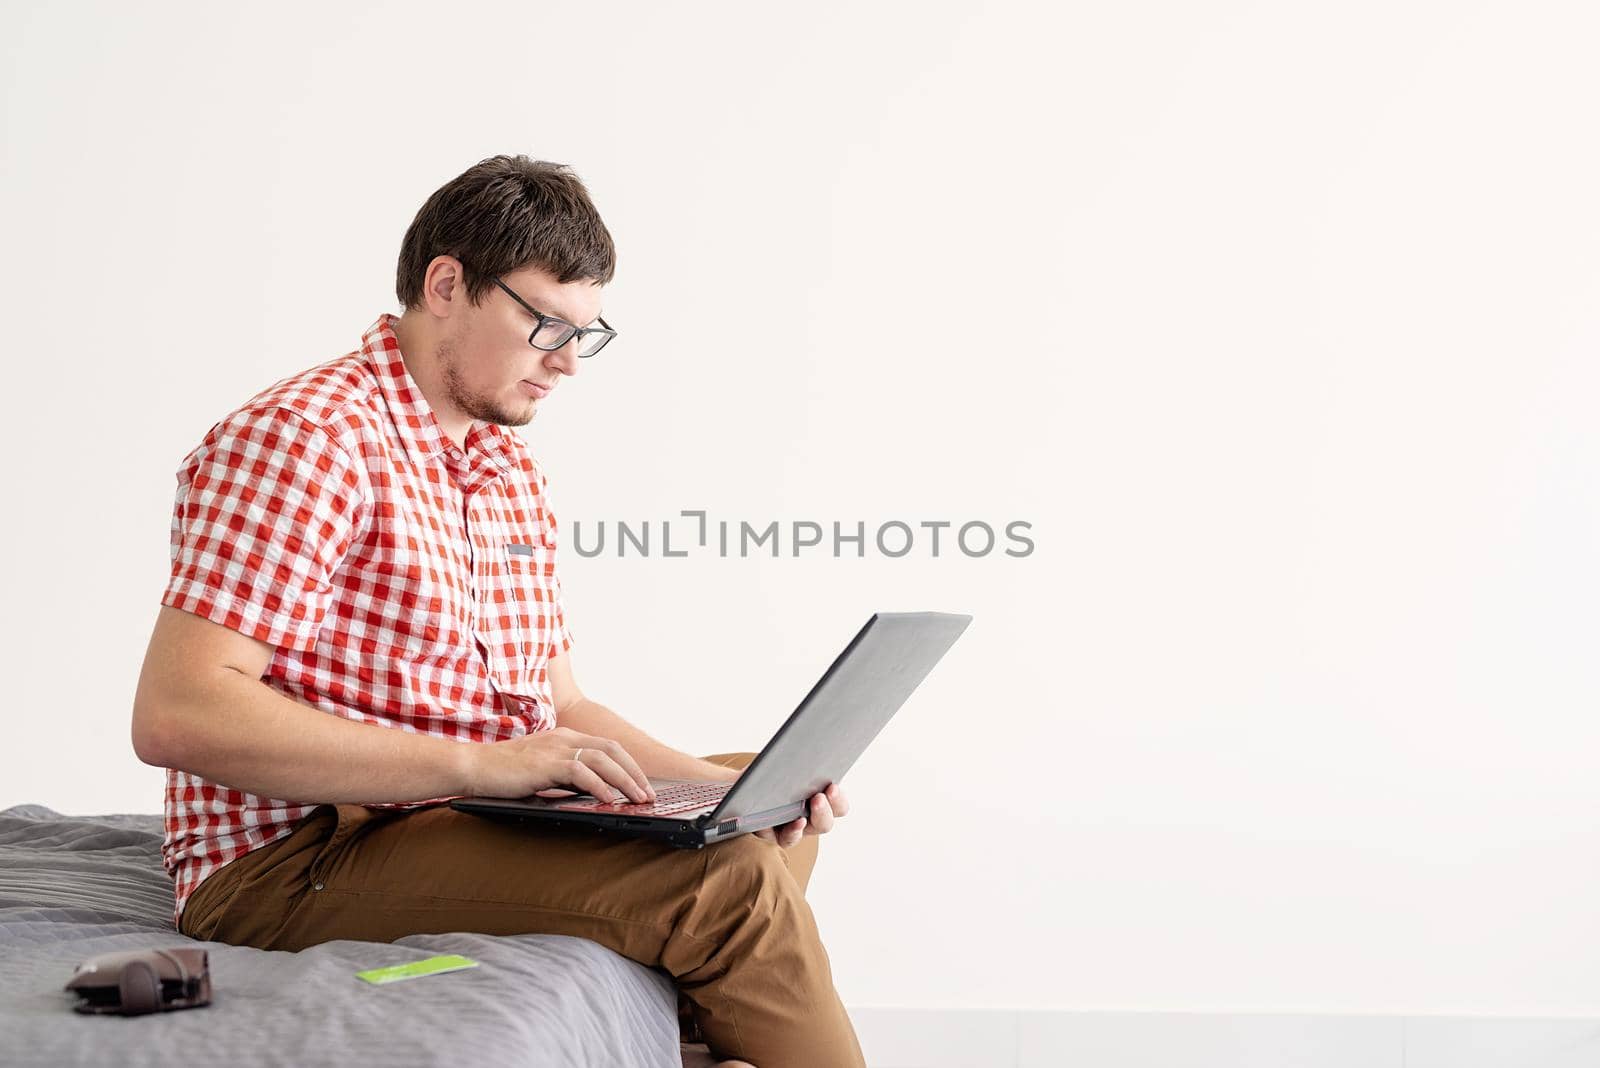 Online shopping concept. Young man sitting on the bed and shopping online using tablet, copy space